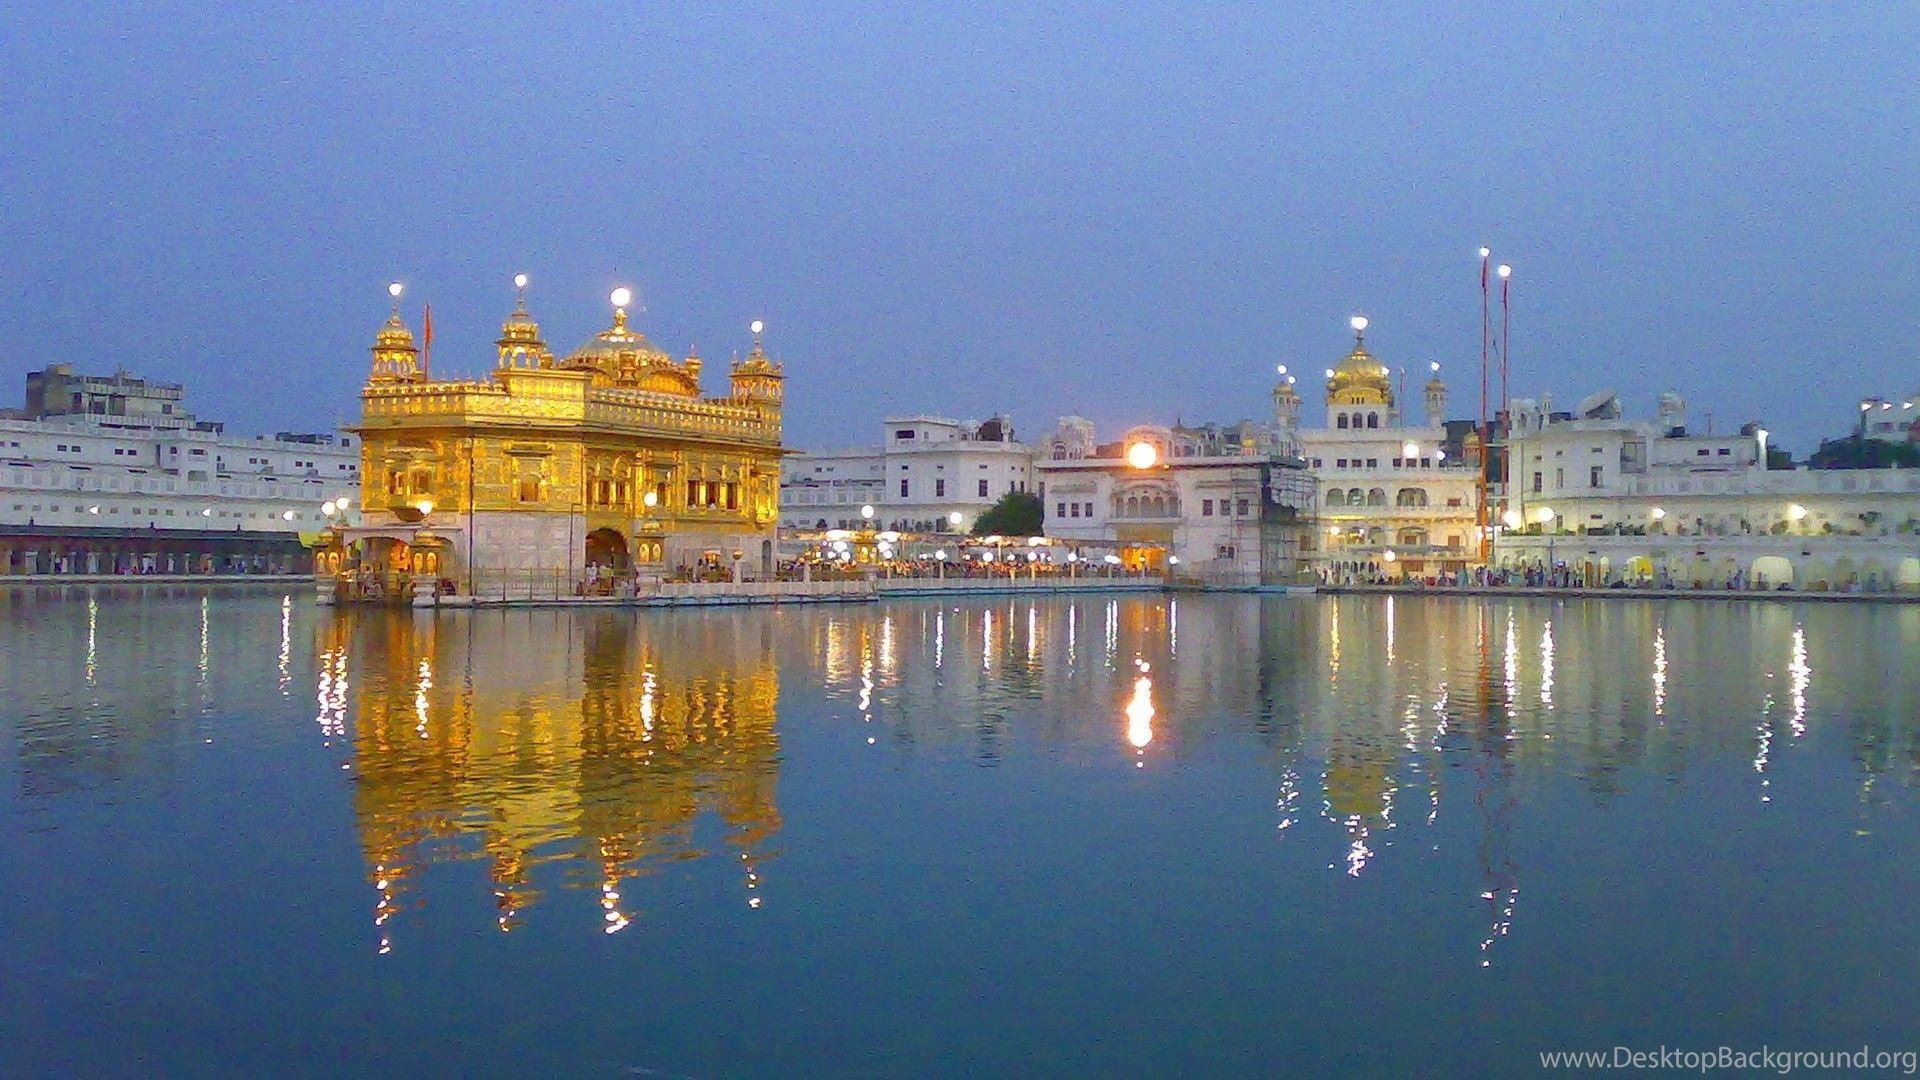 Sikhism Wallpapers - Top Free Sikhism Backgrounds - WallpaperAccess